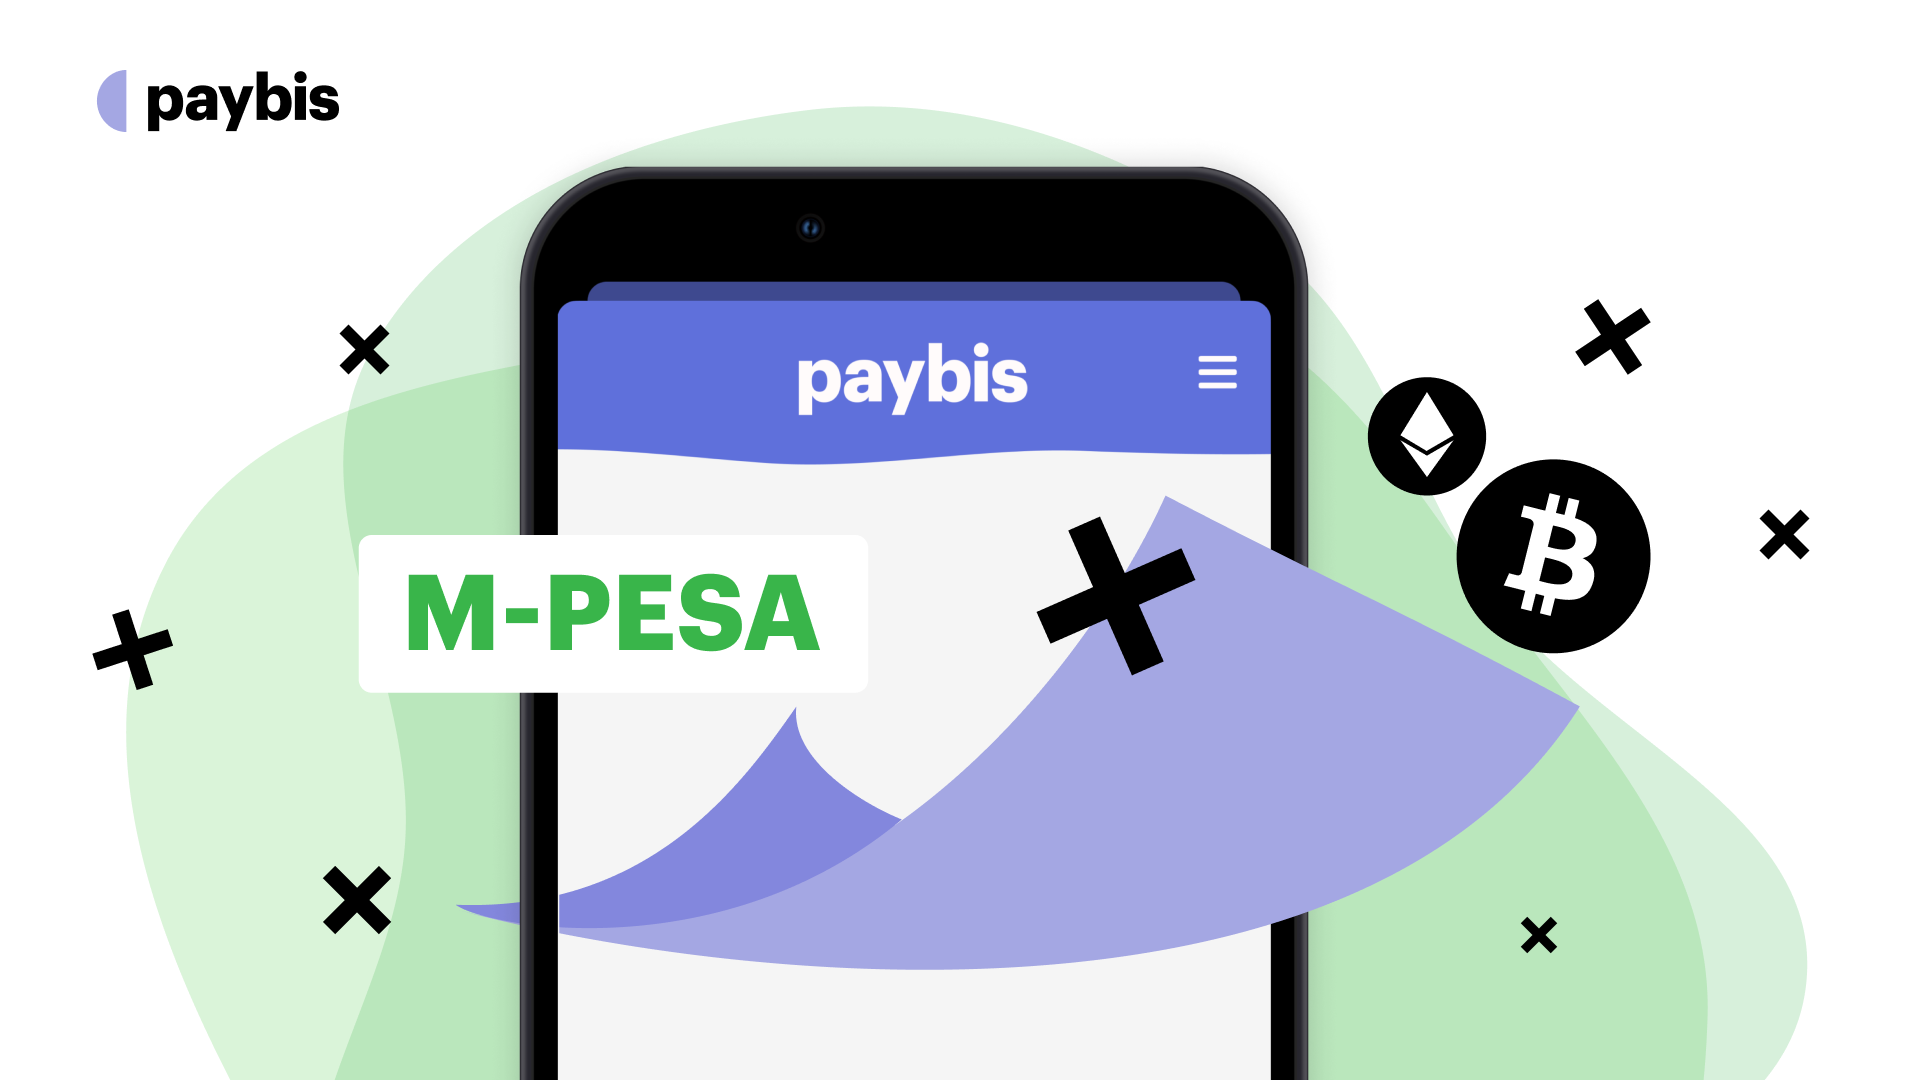 Mpesa reversal refers to the process of retracting a transaction made via mpesa, primarily when sent to an incorrect till number or account